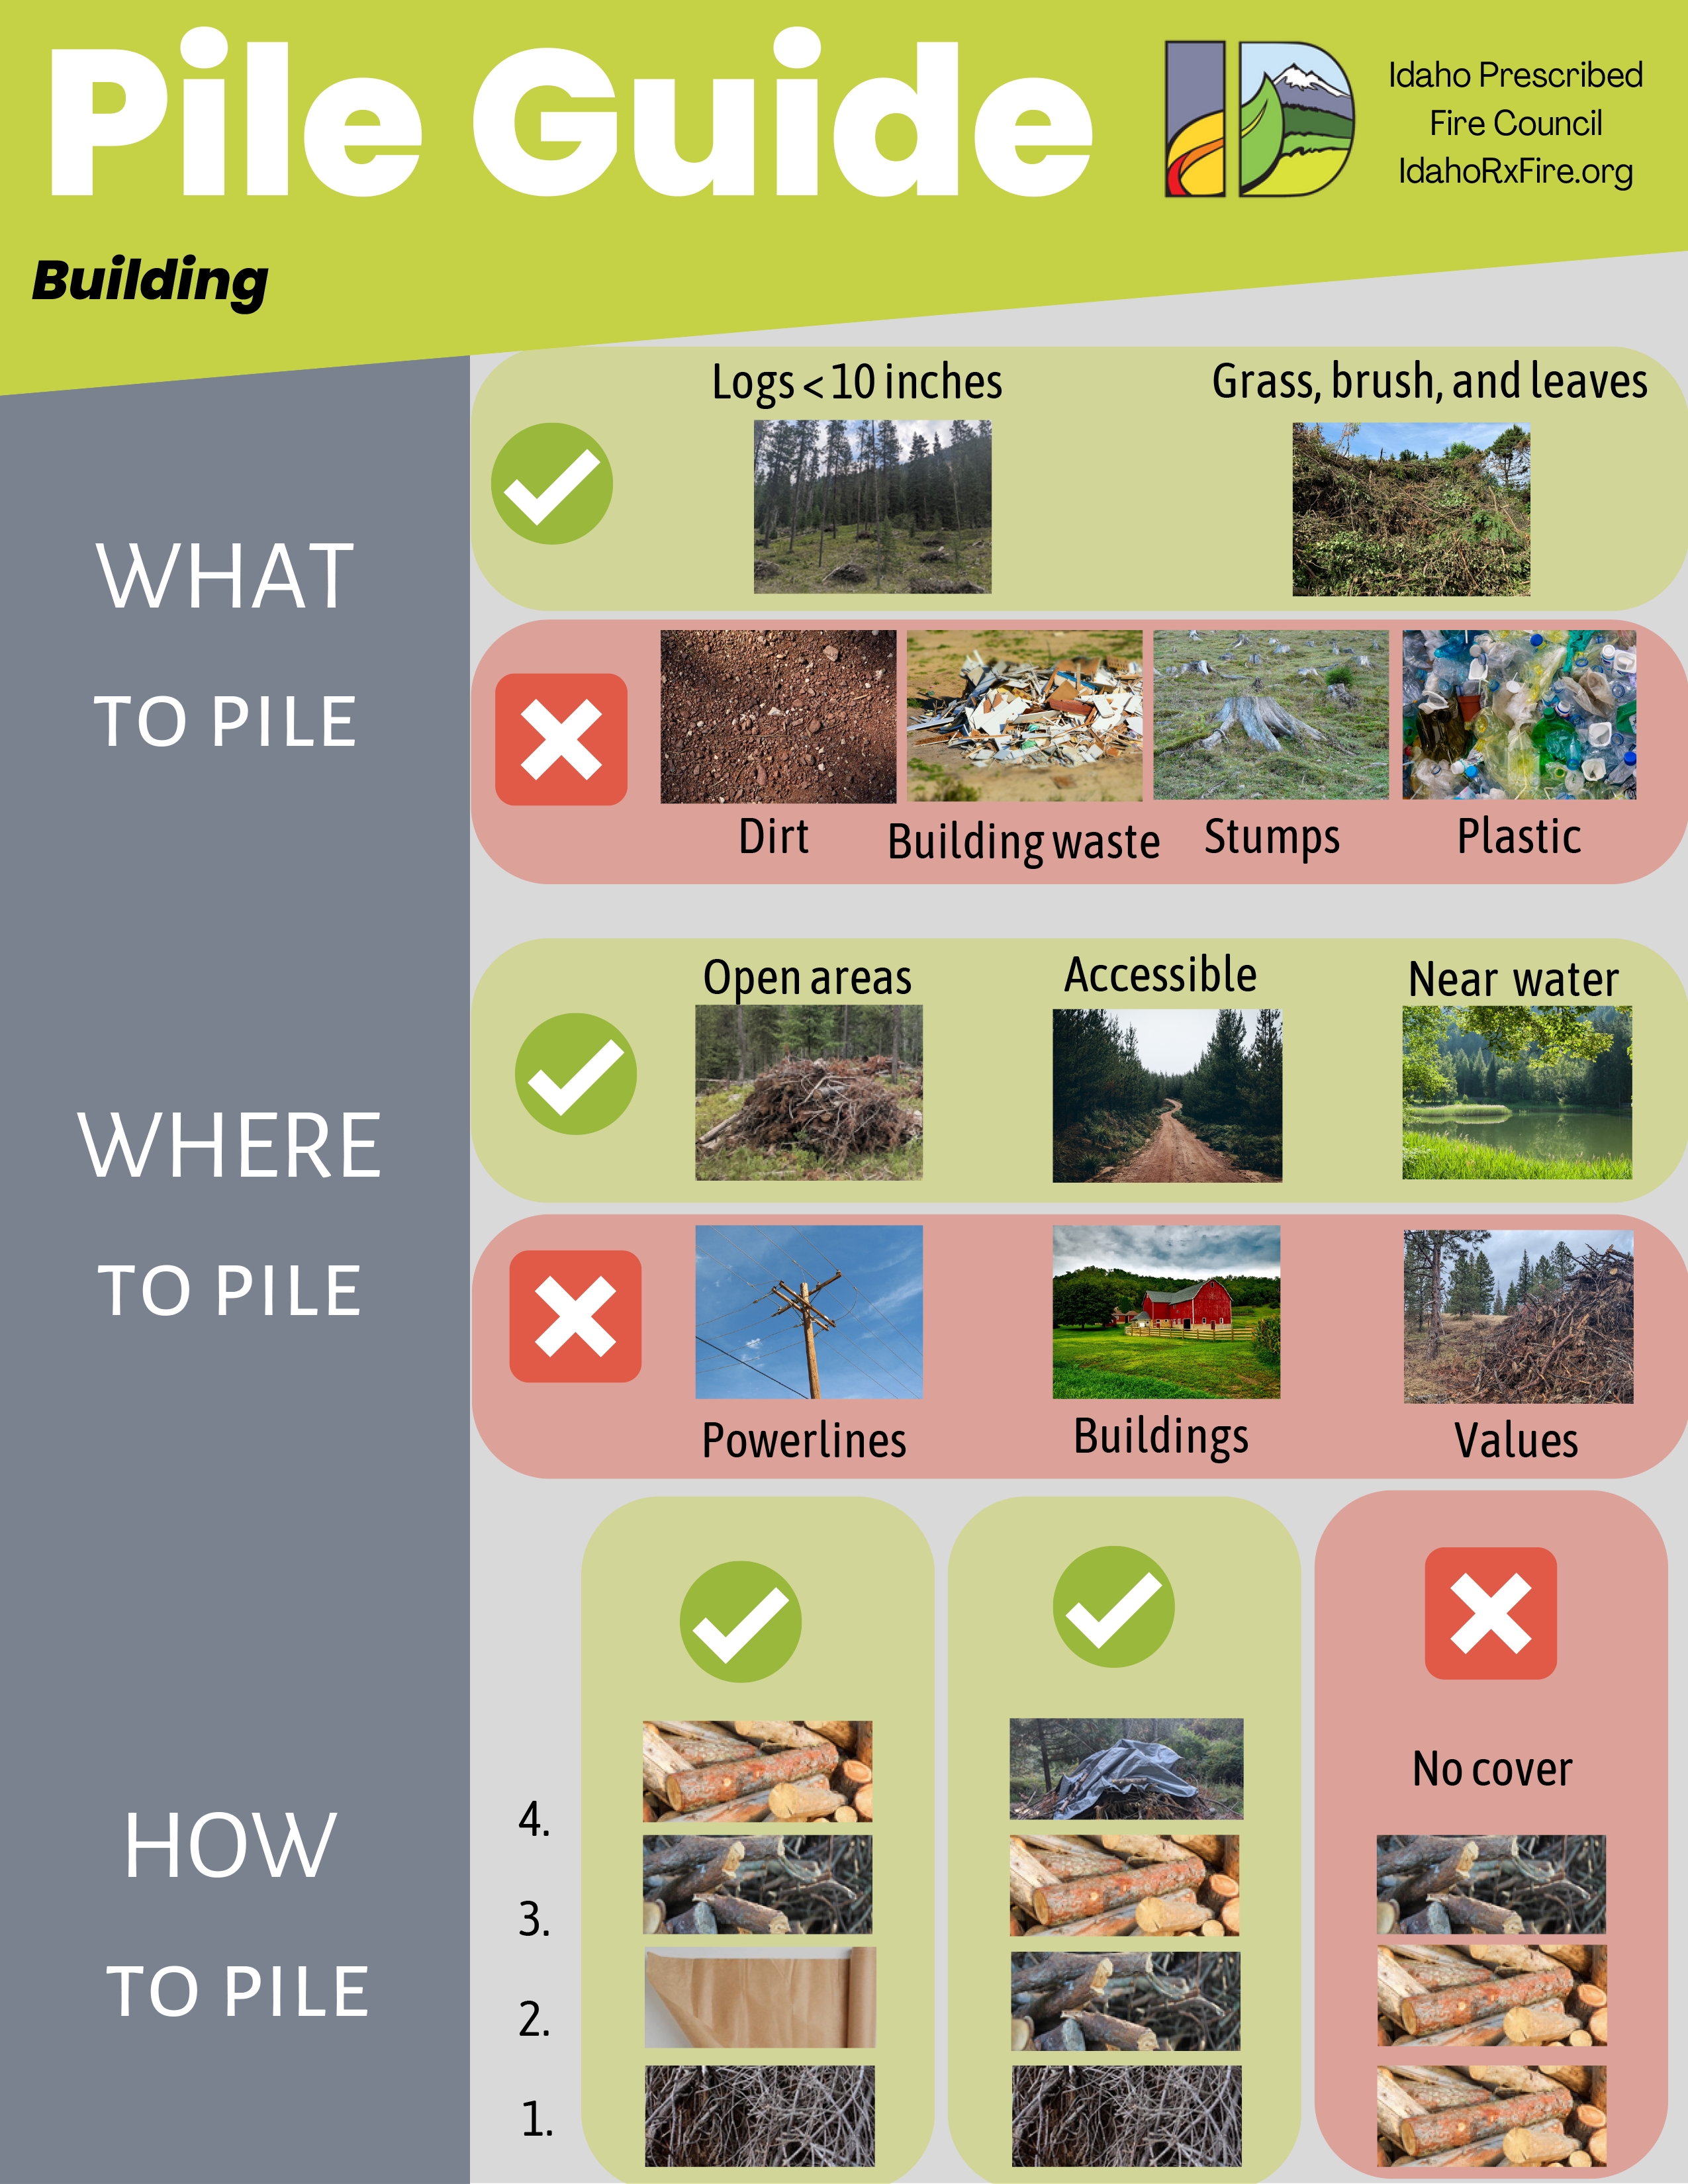 Idaho PFC Pile Guide Building graphic